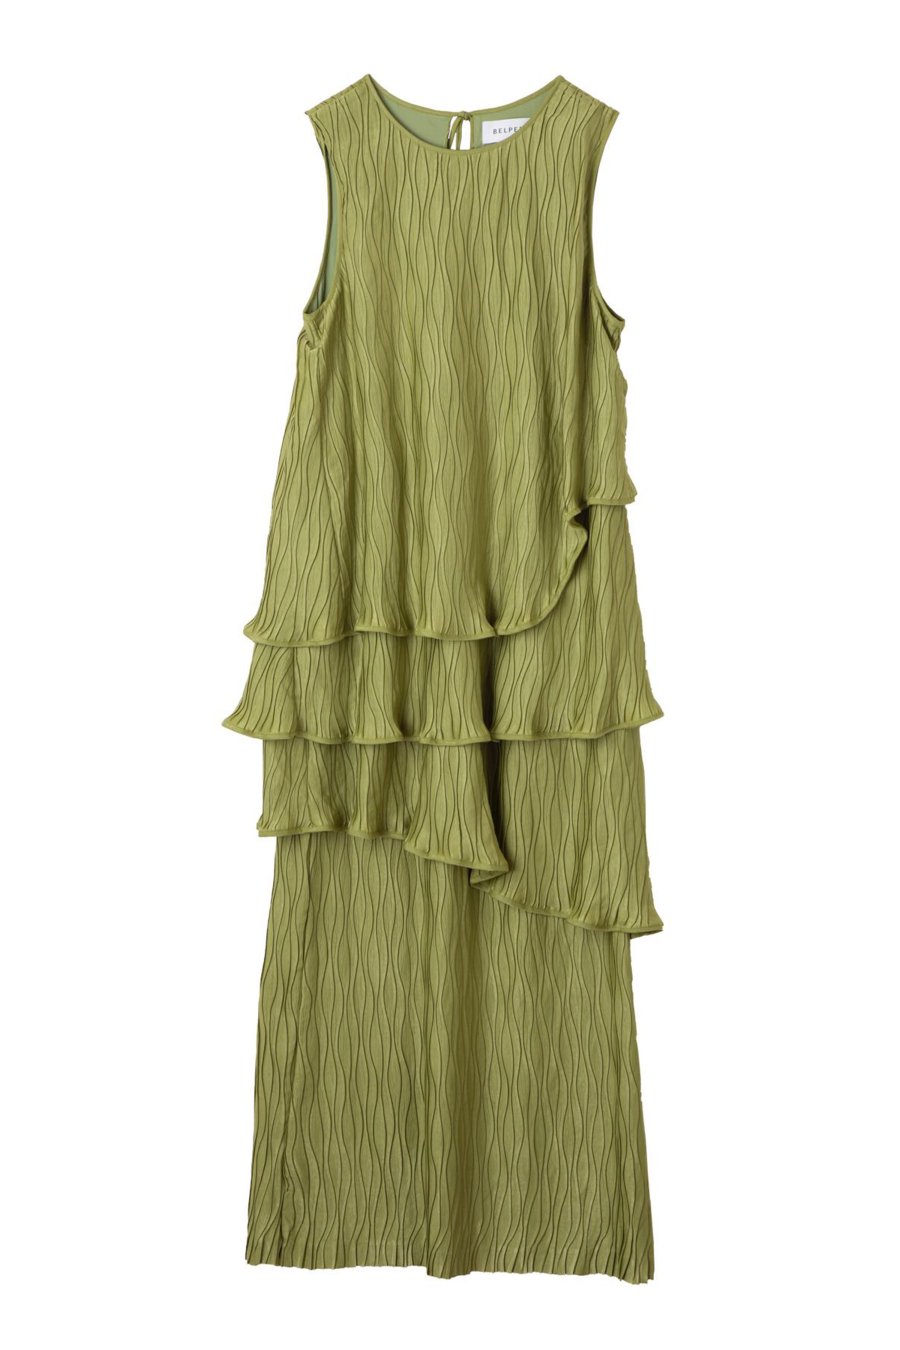 BELPER 22ss PLEATED DRESS(GREEN)<img class='new_mark_img2' src='https://img.shop-pro.jp/img/new/icons15.gif' style='border:none;display:inline;margin:0px;padding:0px;width:auto;' />